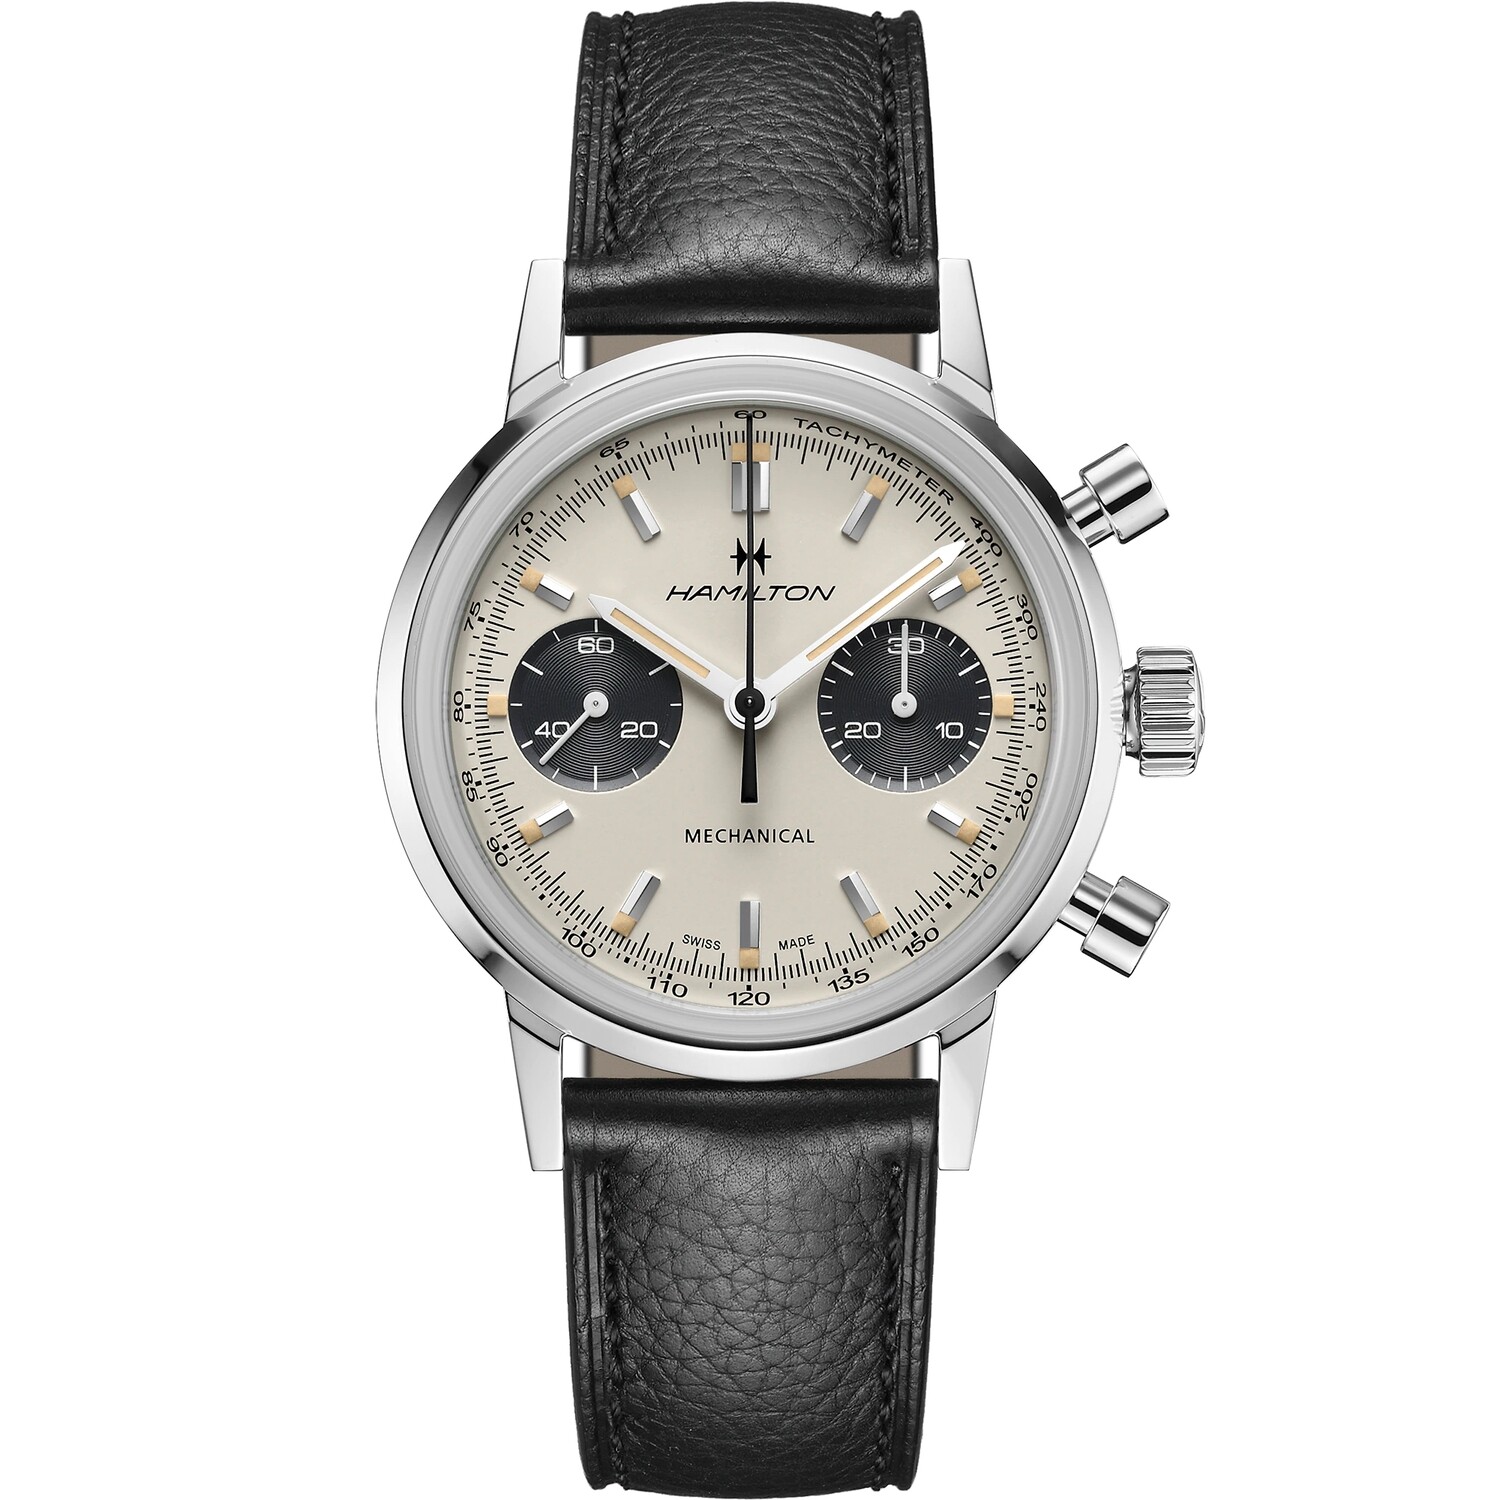 HAMILTON AMERICAN CLASSIC INTRA-MATIC CHRONOGRAPH H Mechanical | 40mm | H38429710 100M WR 60H  Power Reserve Sapphire crystal leather band automatic men's watch